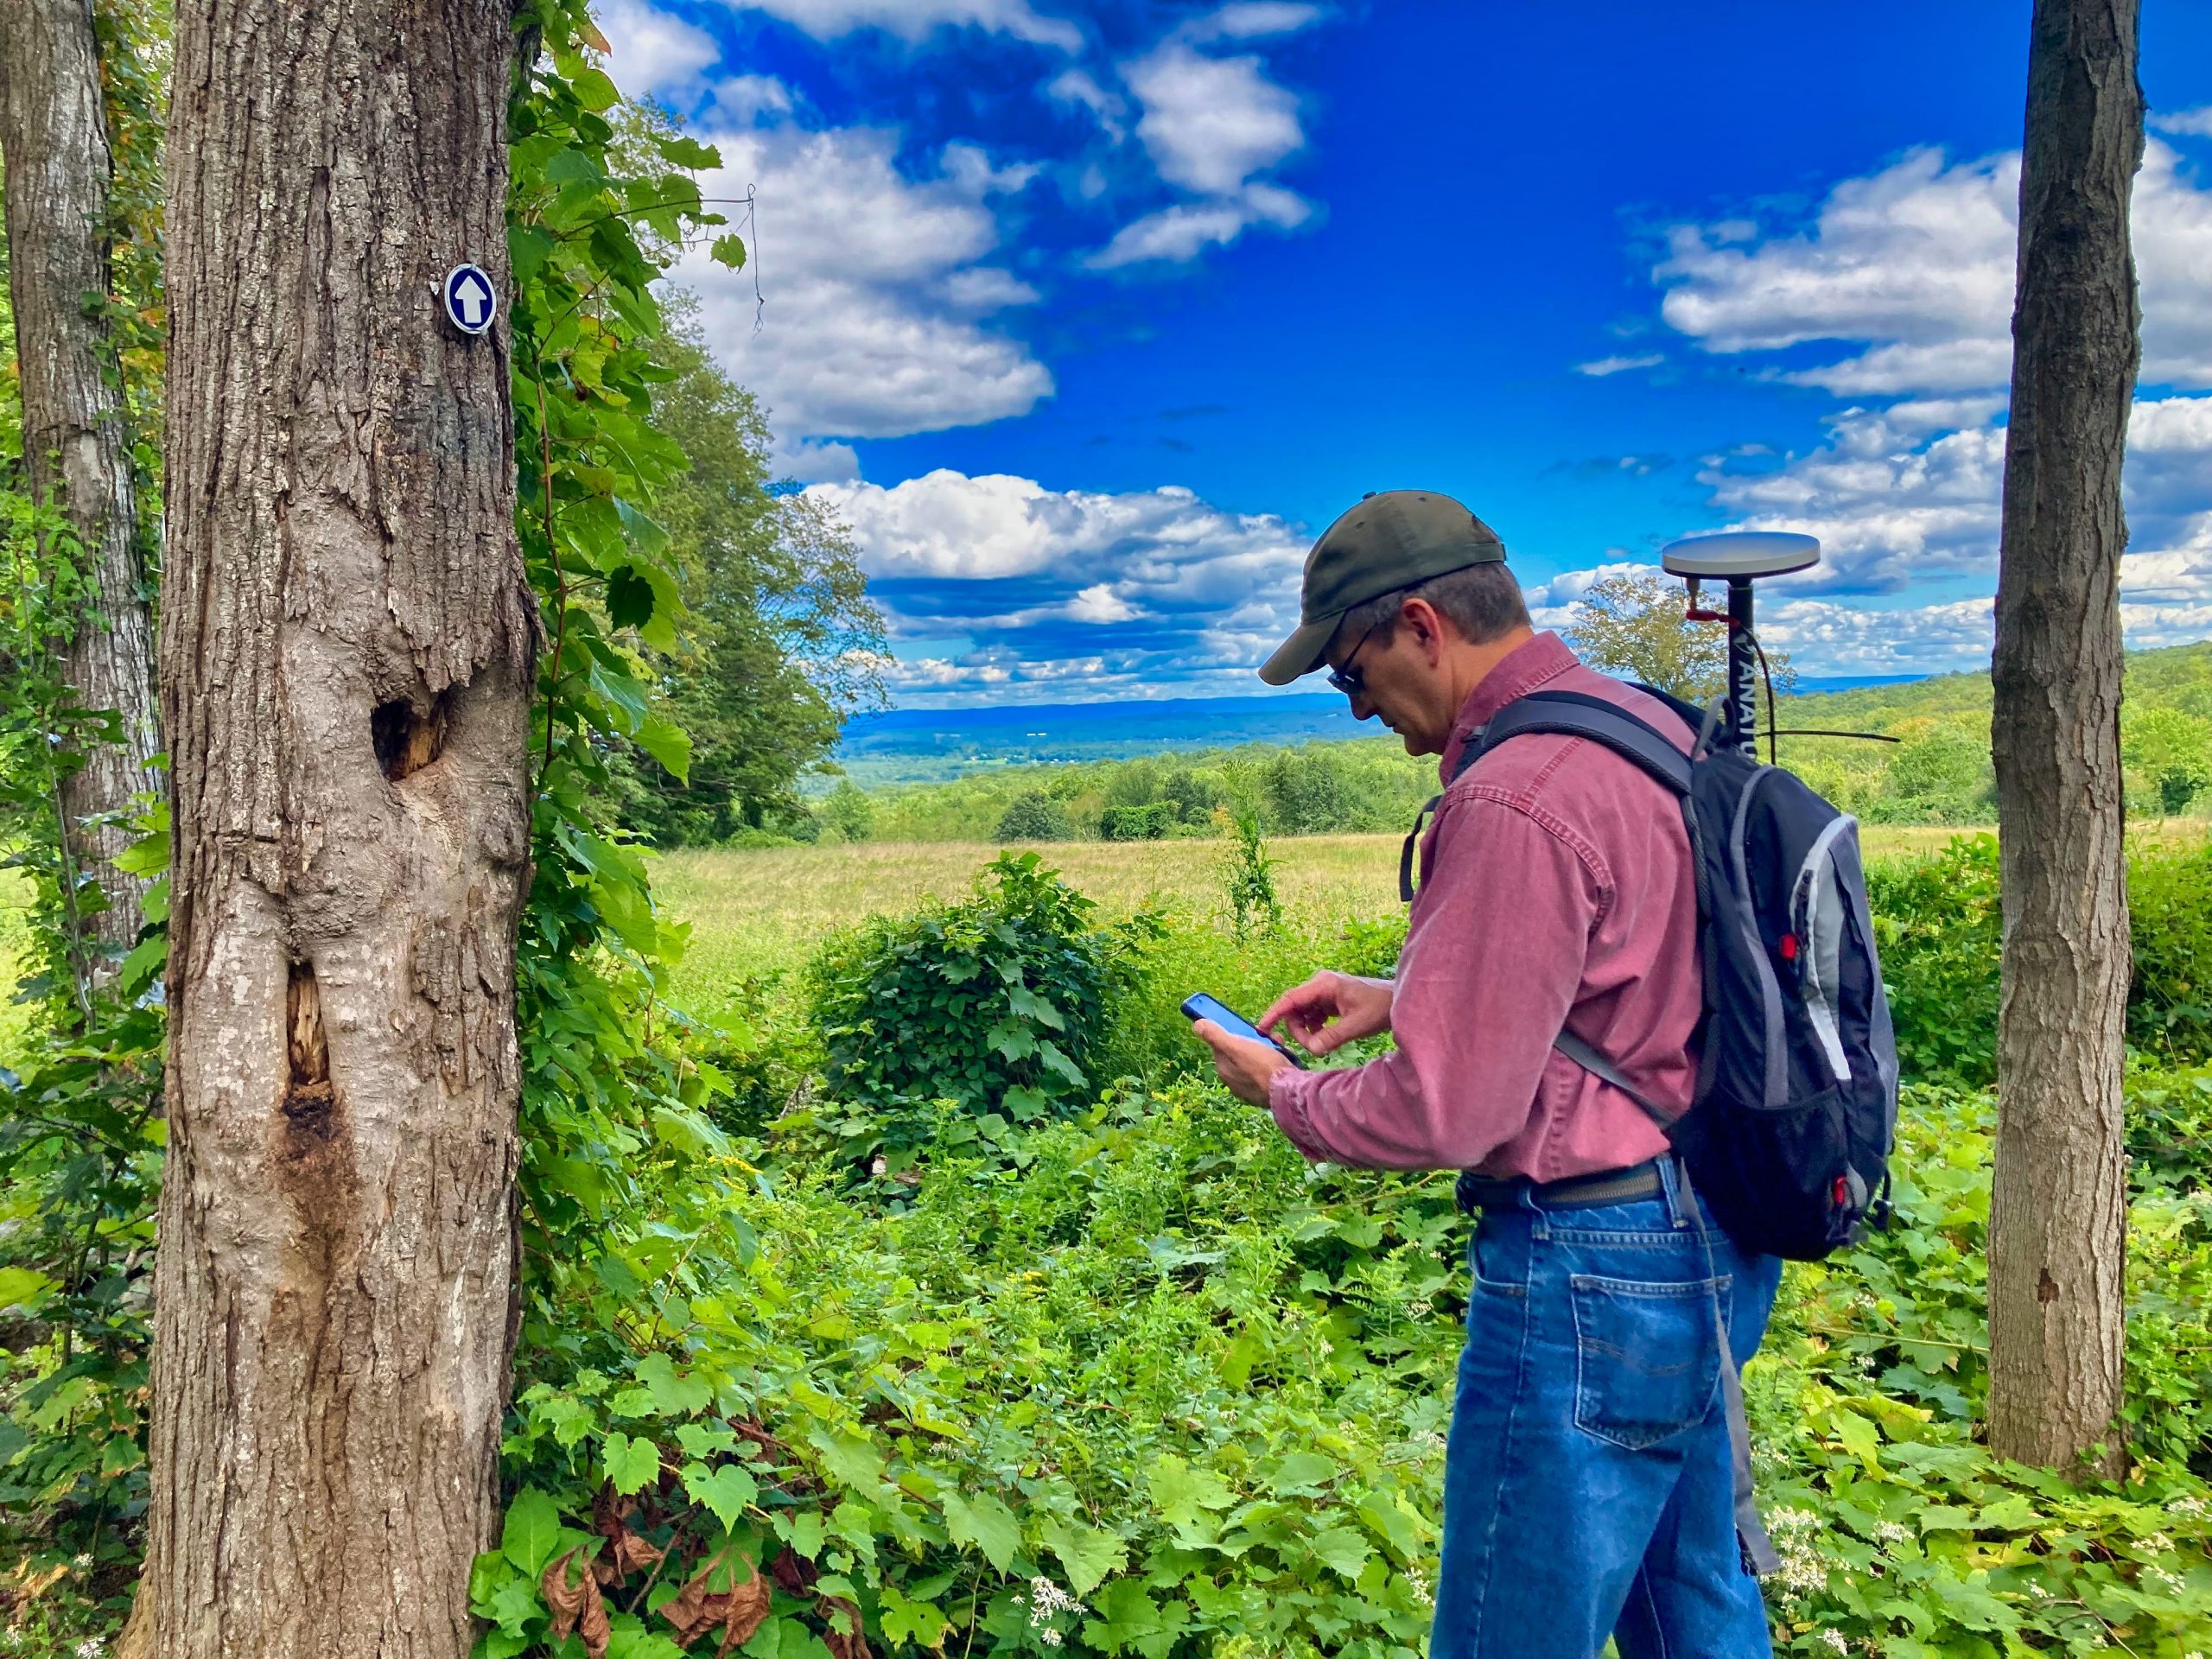 Steve Perry collects high accuracy GNSS GPS data in the field for a land trust conservatorory using Esri ArcGIS Field Maps